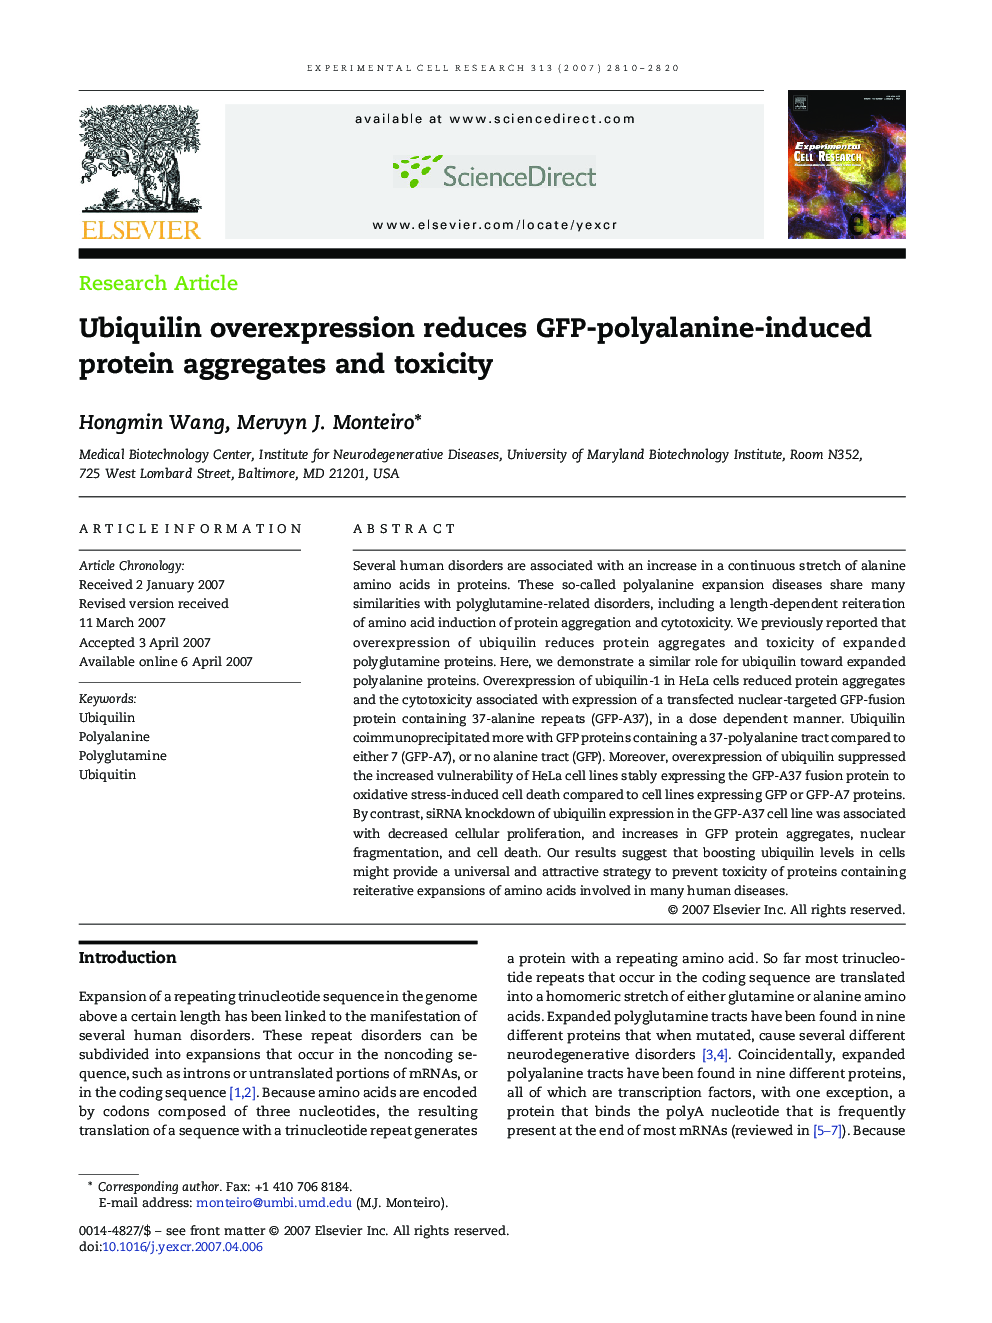 Ubiquilin overexpression reduces GFP-polyalanine-induced protein aggregates and toxicity